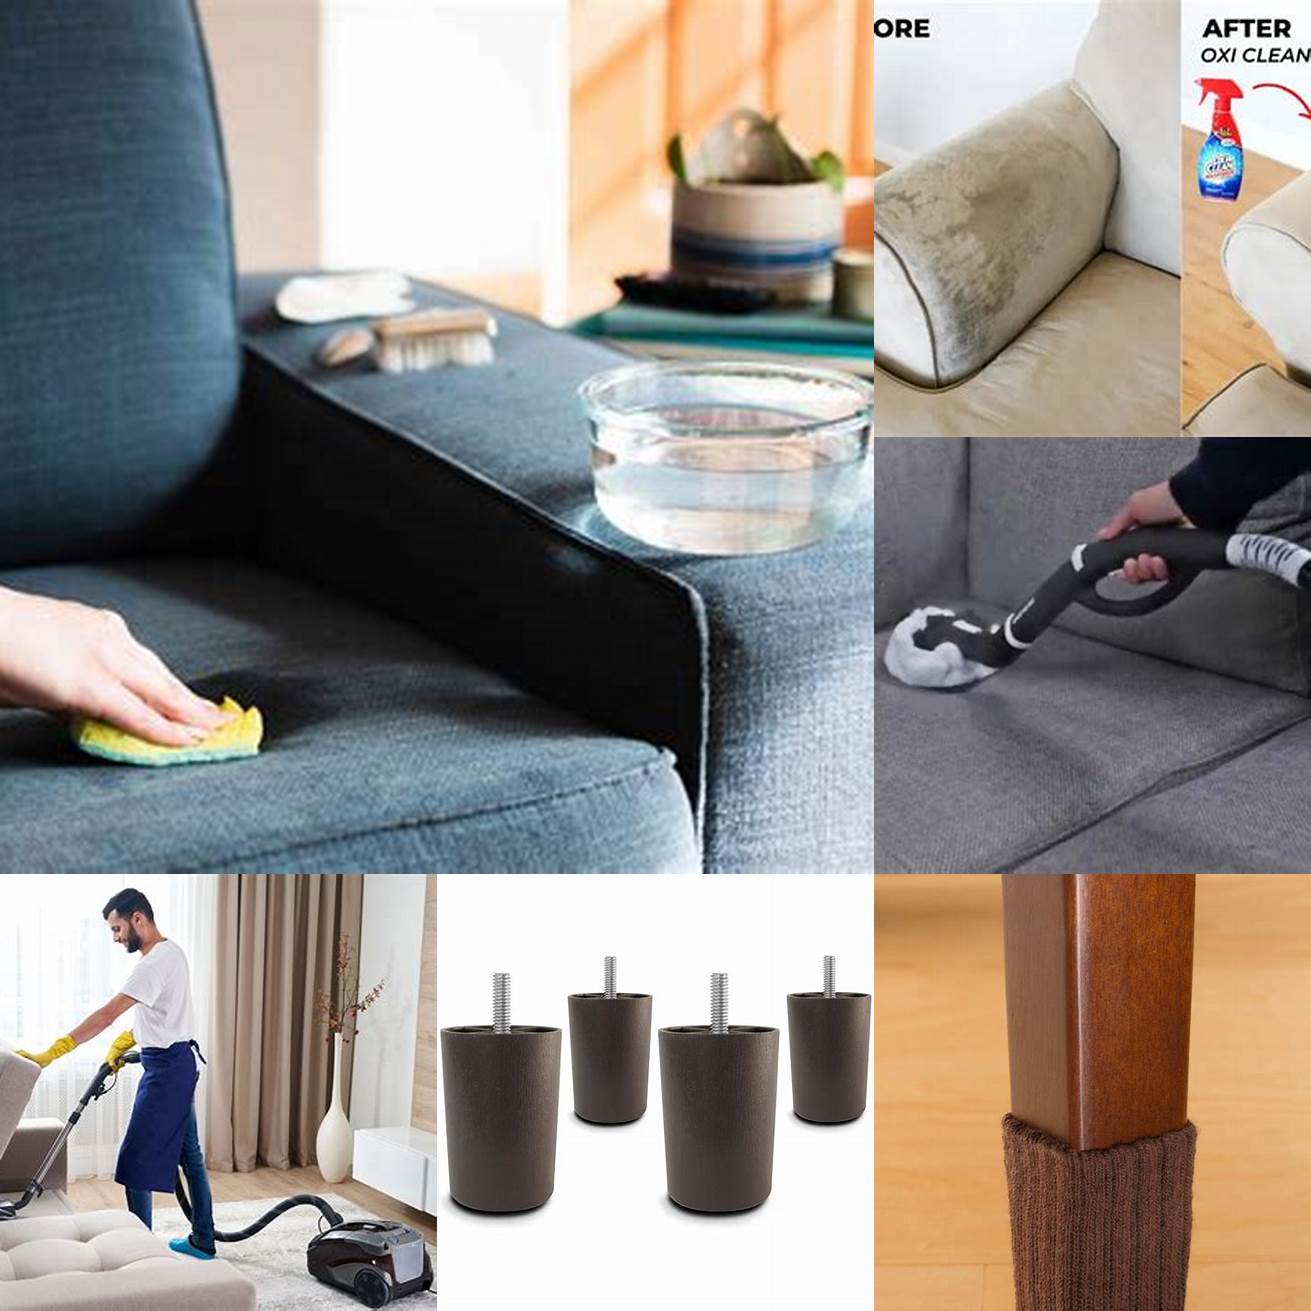 Clean the bottom of your furniture legs